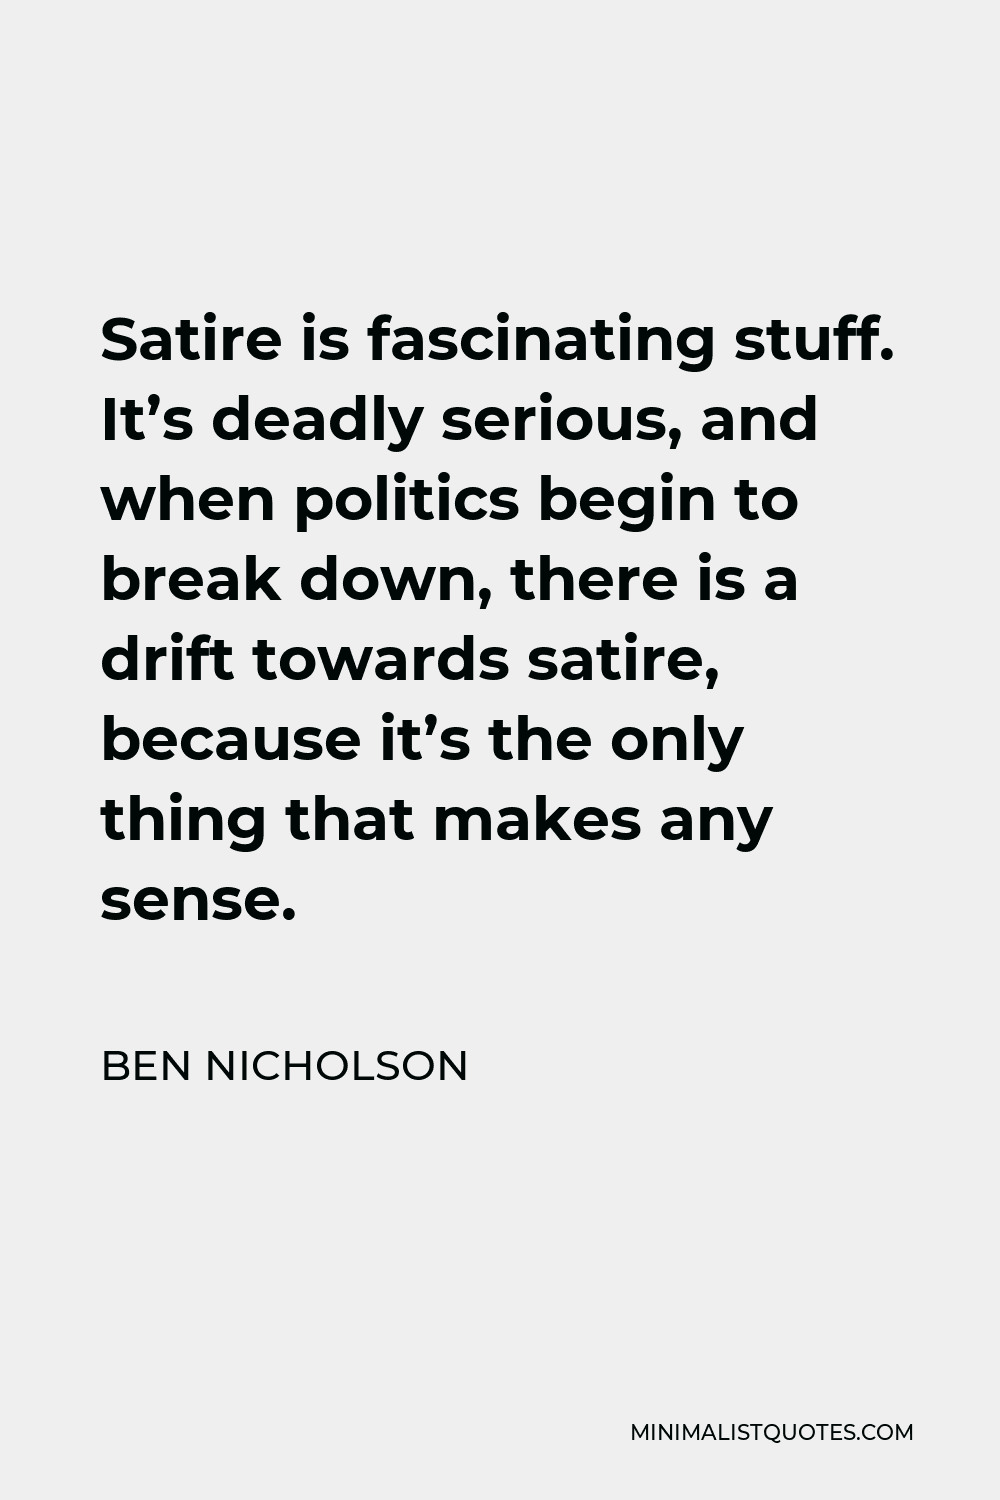 Ben Nicholson Quote - Satire is fascinating stuff. It’s deadly serious, and when politics begin to break down, there is a drift towards satire, because it’s the only thing that makes any sense.